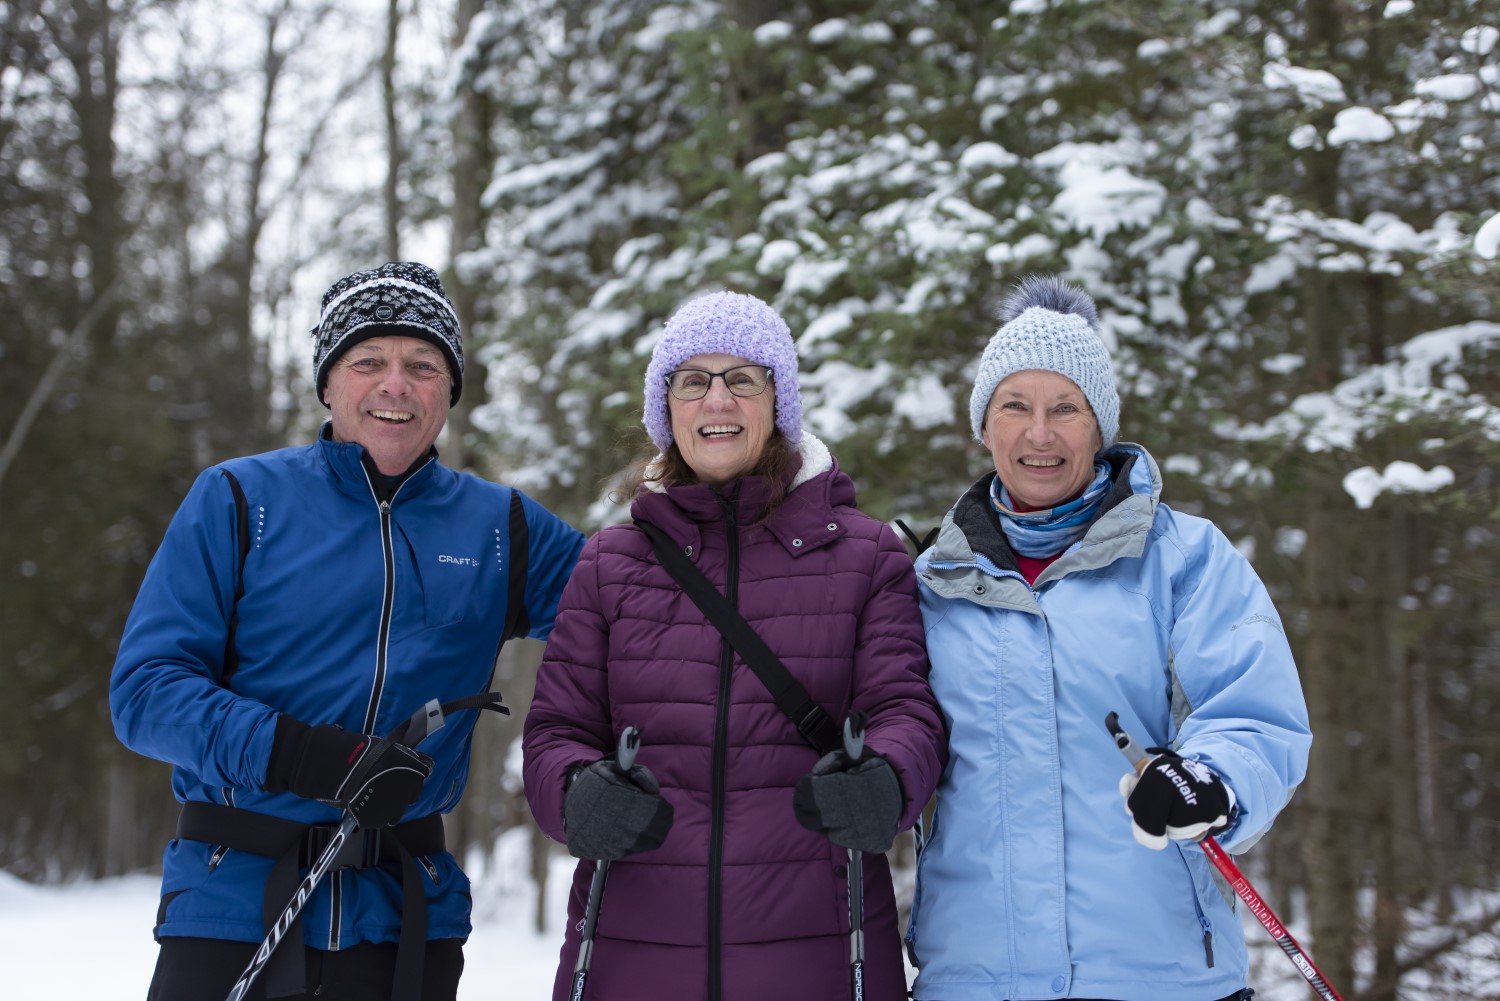 A group of three seniors with cross country skiing gear in a snowy park